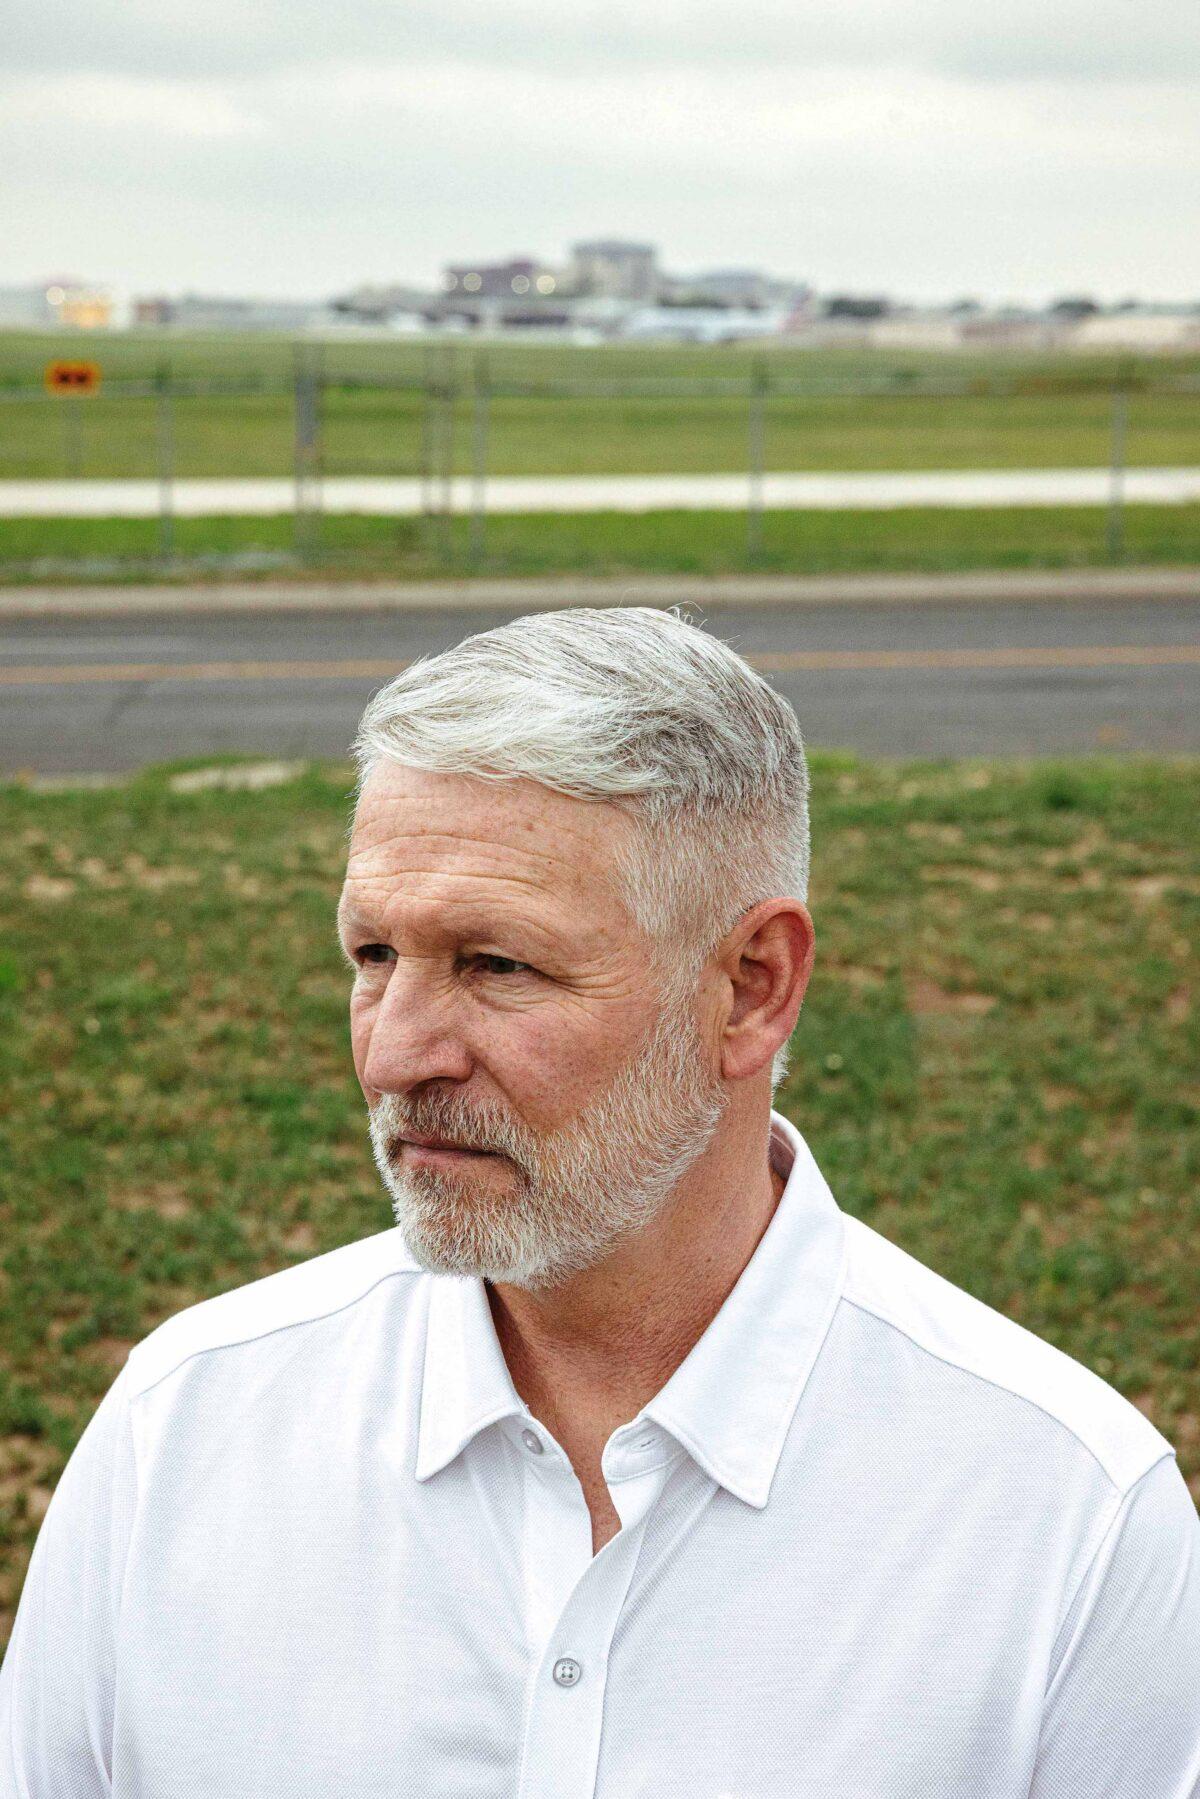 Bob Snow, a longtime pilot with American Airlines, near the San Antonio airport on March 30, 2023. (Josh Huskin for The Epoch Times)